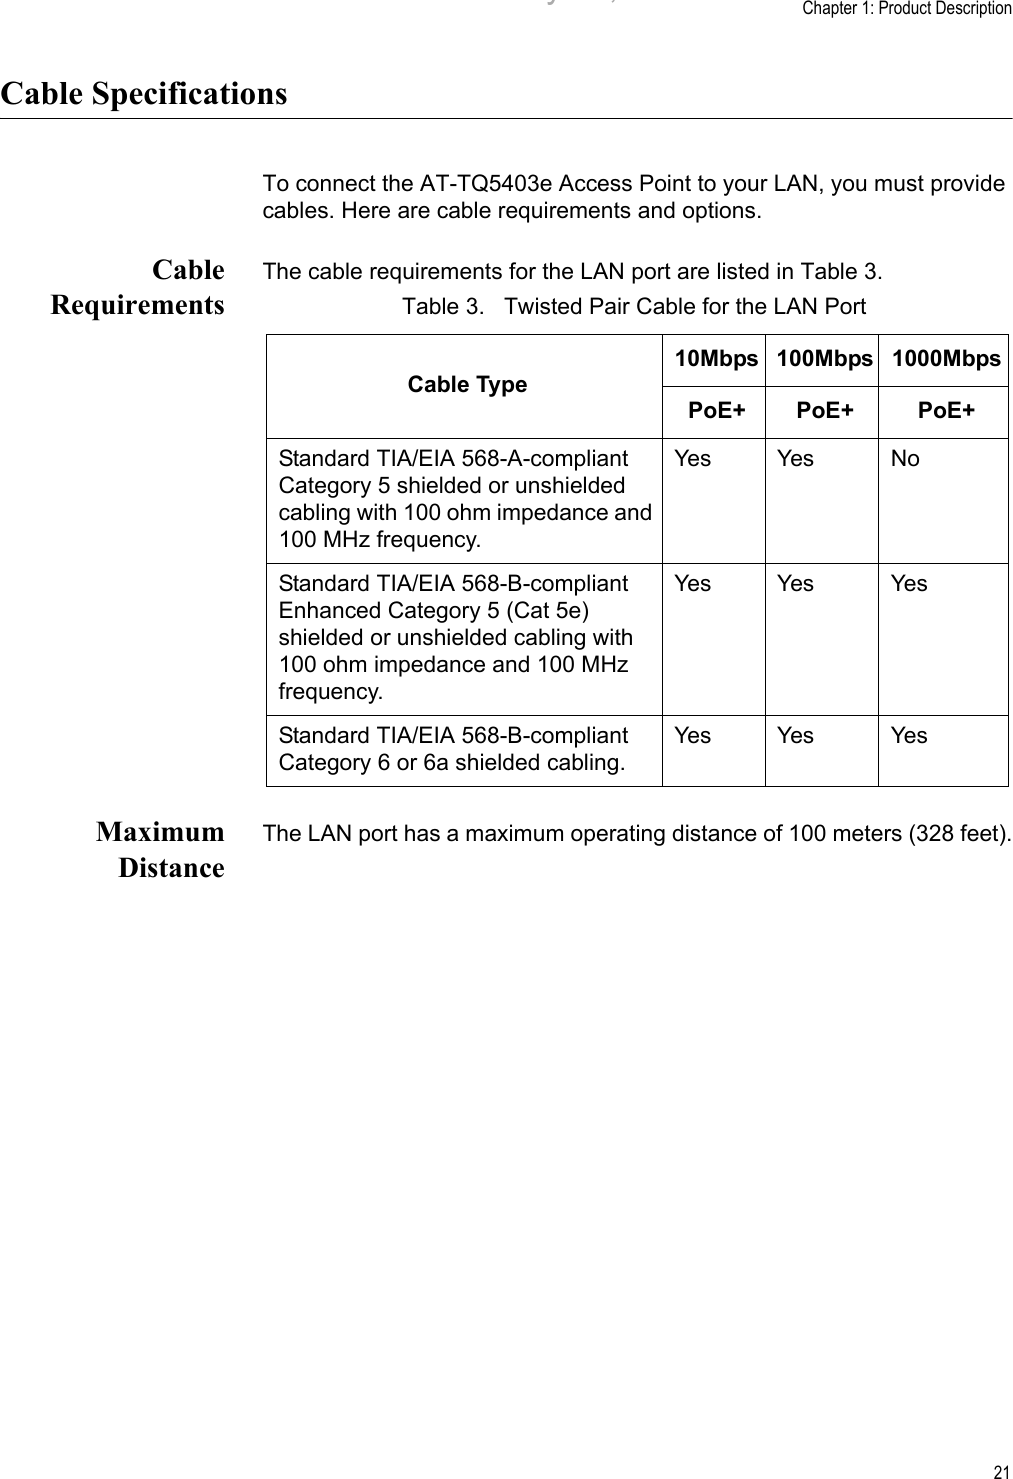 Chapter 1: Product Description21Cable SpecificationsTo connect the AT-TQ5403e Access Point to your LAN, you must provide cables. Here are cable requirements and options.CableRequirementsThe cable requirements for the LAN port are listed in Table 3.MaximumDistanceThe LAN port has a maximum operating distance of 100 meters (328 feet).Table 3.   Twisted Pair Cable for the LAN PortCable Type10Mbps 100Mbps 1000MbpsPoE+ PoE+ PoE+Standard TIA/EIA 568-A-compliant Category 5 shielded or unshielded cabling with 100 ohm impedance and 100 MHz frequency.Yes Yes NoStandard TIA/EIA 568-B-compliant Enhanced Category 5 (Cat 5e) shielded or unshielded cabling with 100 ohm impedance and 100 MHz frequency.Yes Yes YesStandard TIA/EIA 568-B-compliant Category 6 or 6a shielded cabling.Yes Yes YesDraft 5 on February 14, 2019